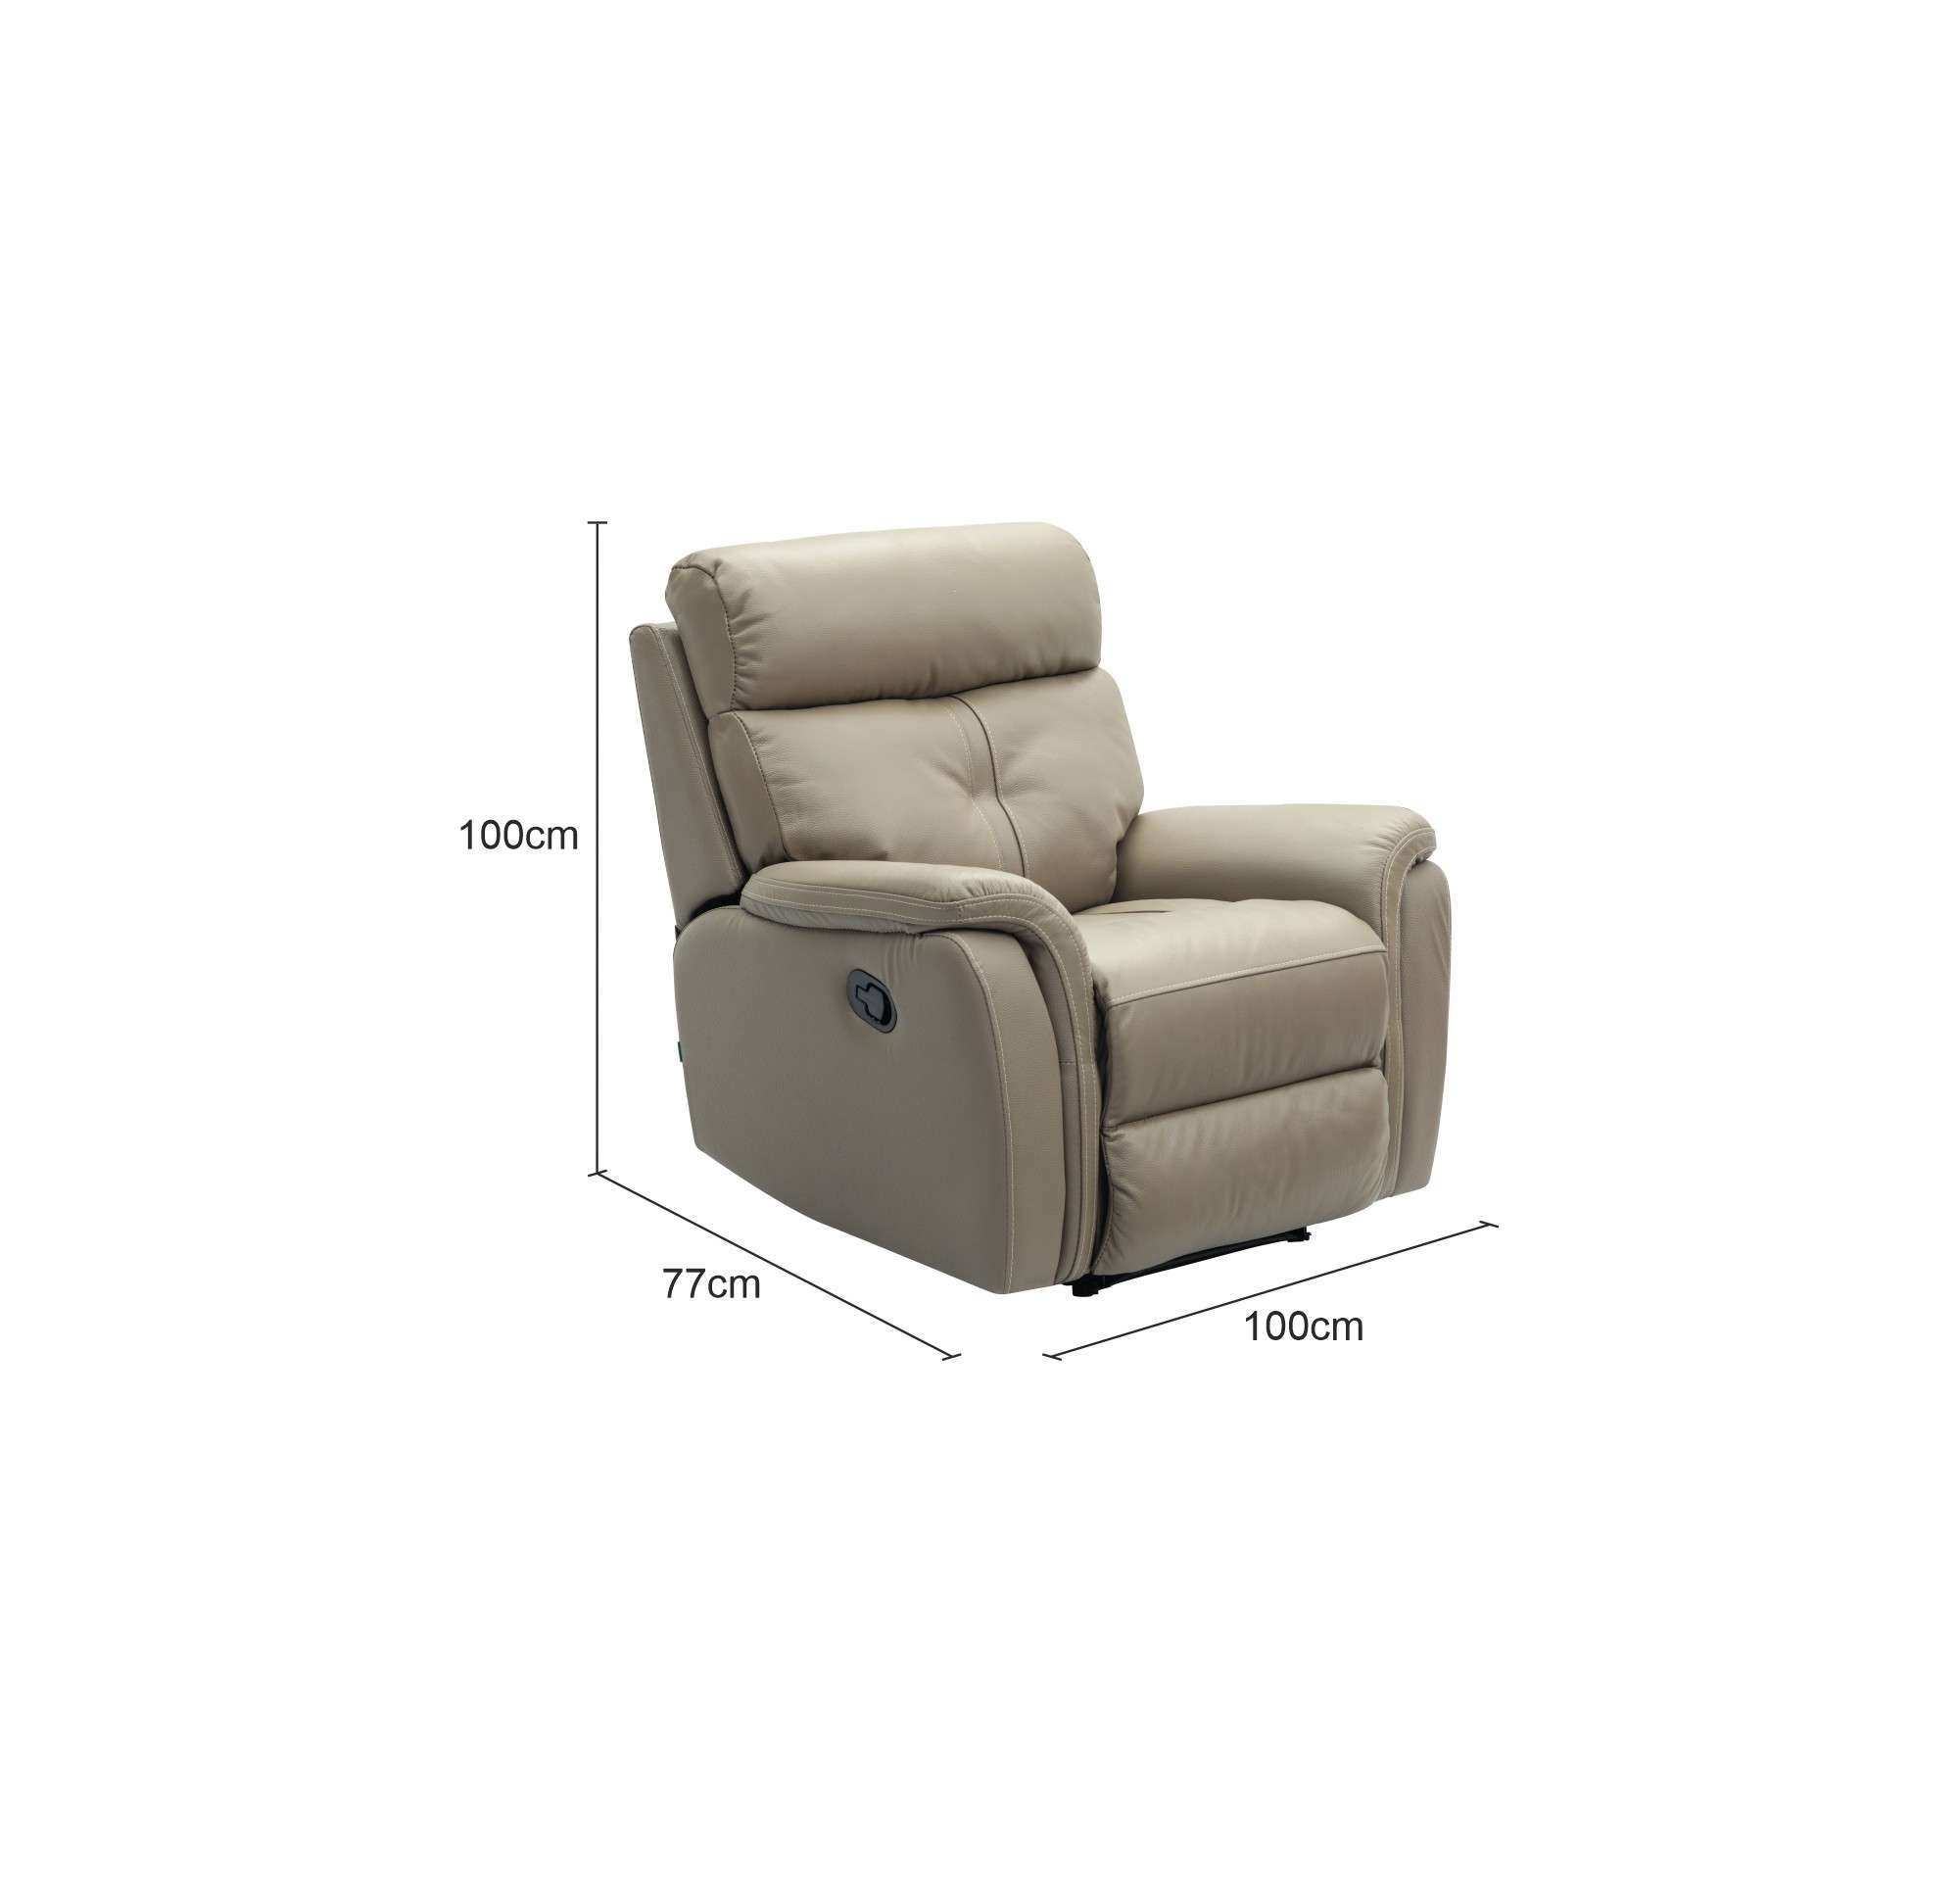 SAC001R-Alicia Sofa 1 Seater With Recliner-HLIL14